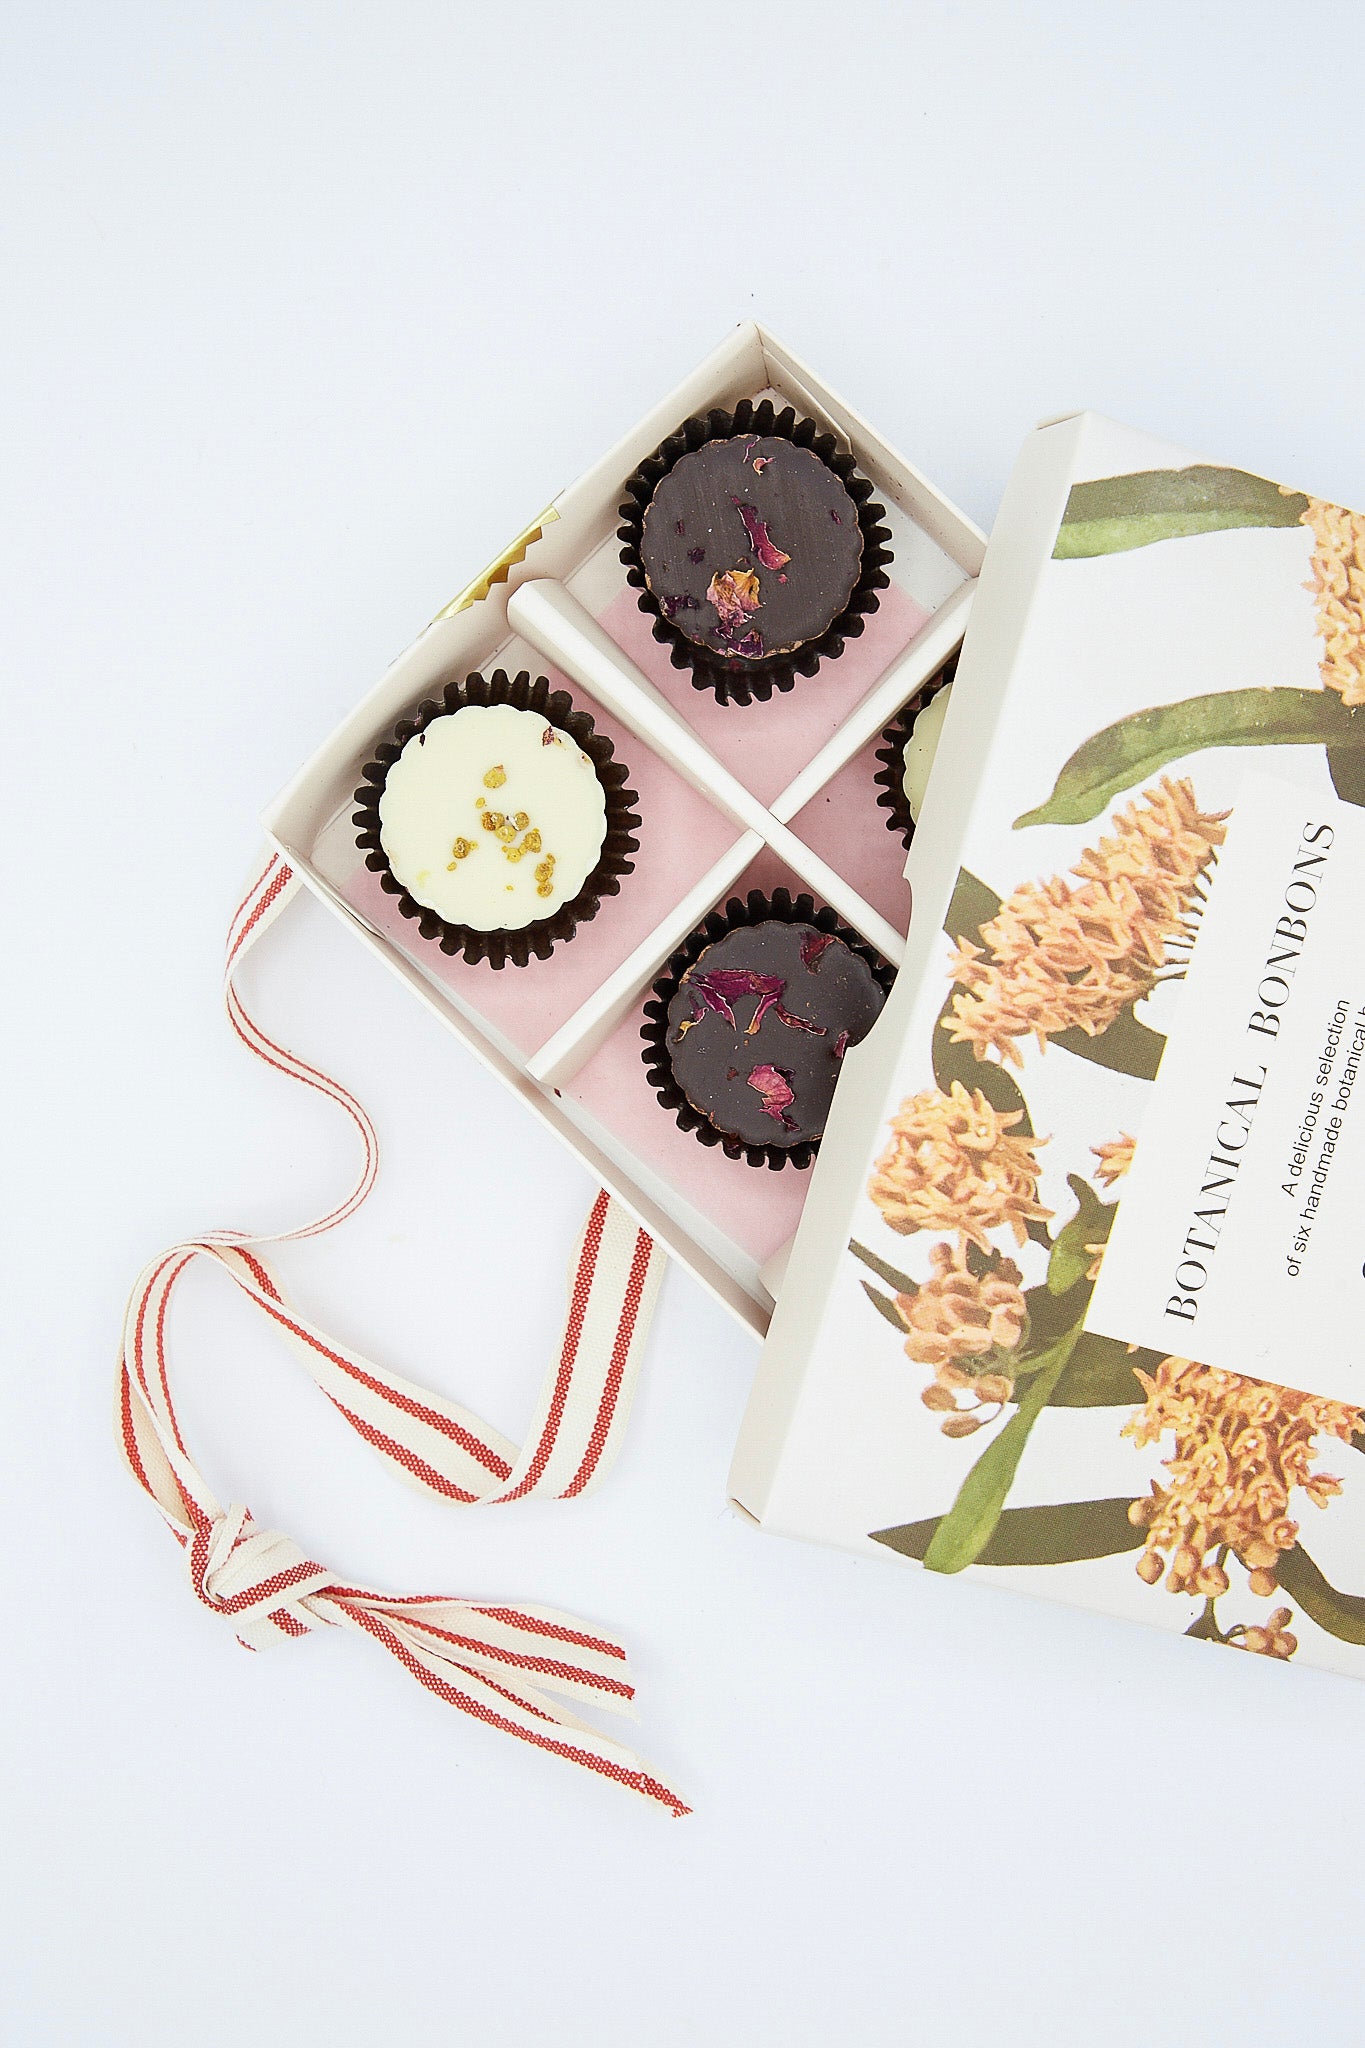 A limited edition box of Chocolate Botanical Bon Bons filled with botanical inspired Bon Bons from The Quiet Botanist.